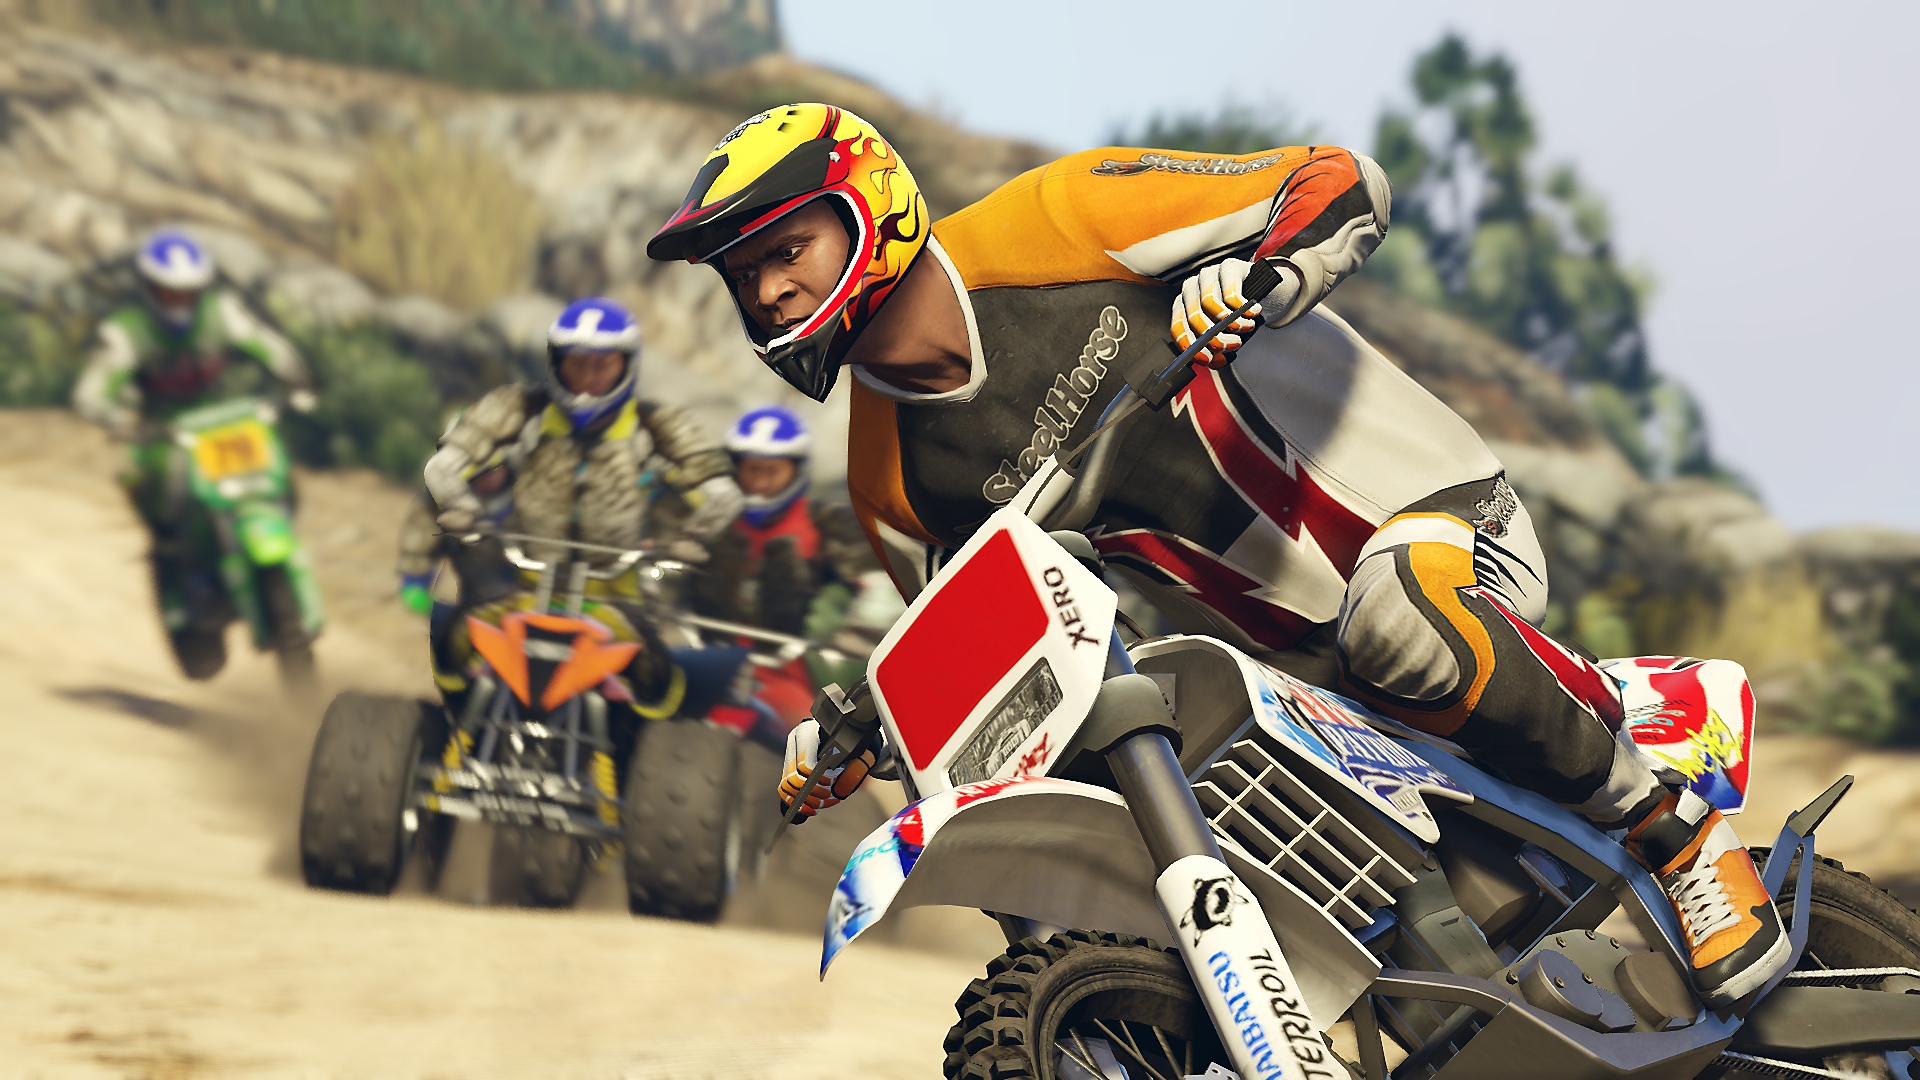 Grand Theft Auto V screenshot showing main character, Franklin, on a motocross bike racing alongside others on quadbikes